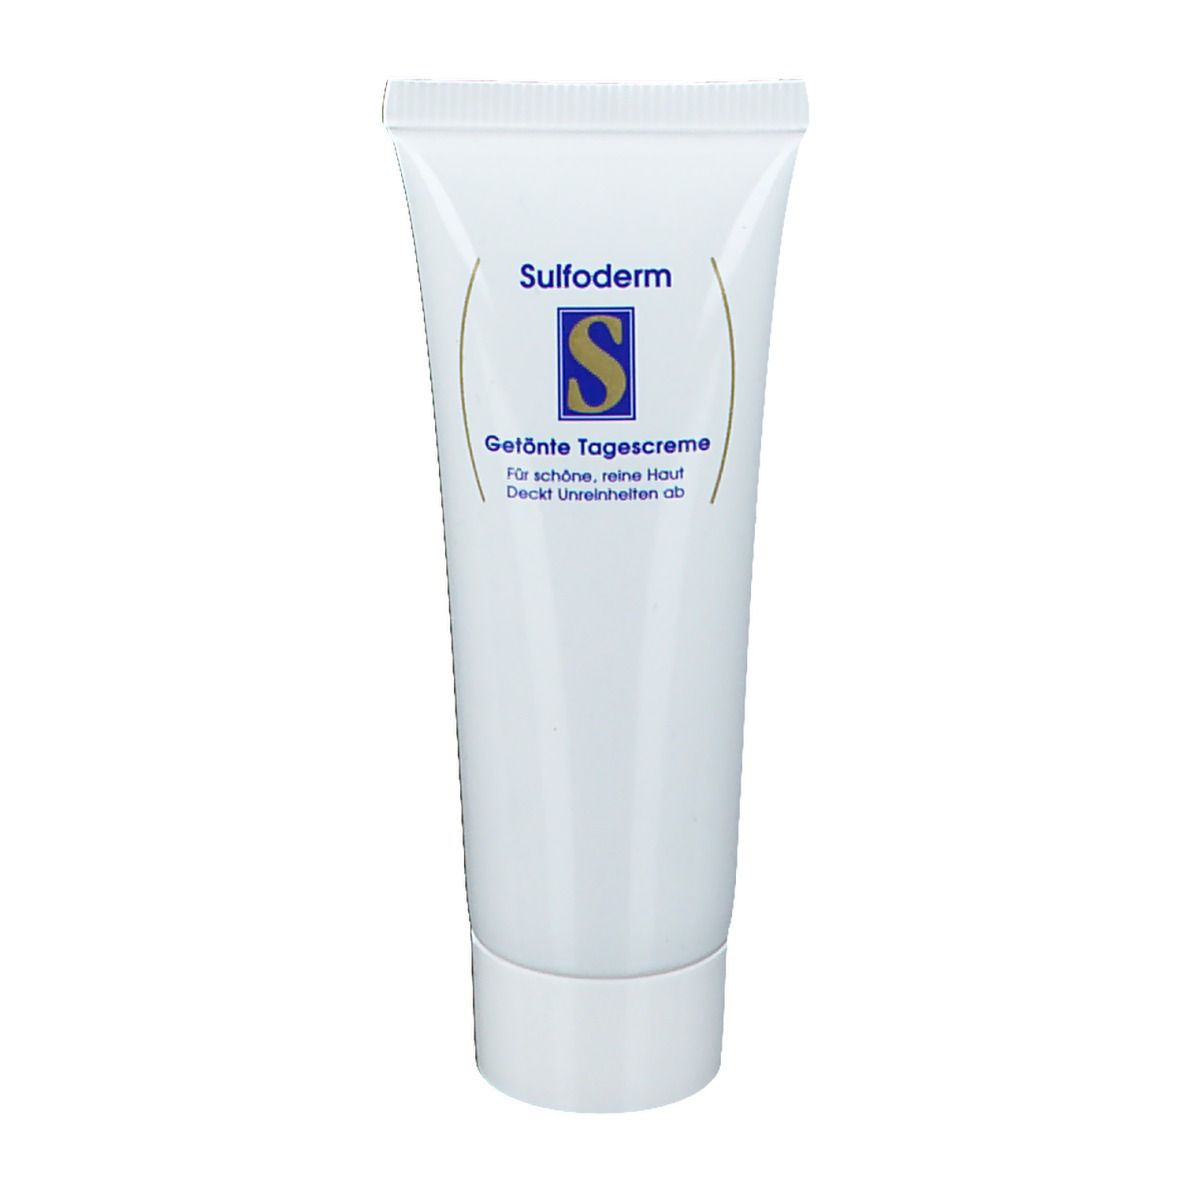 Image of Sulfoderm® S getönte Tagescreme